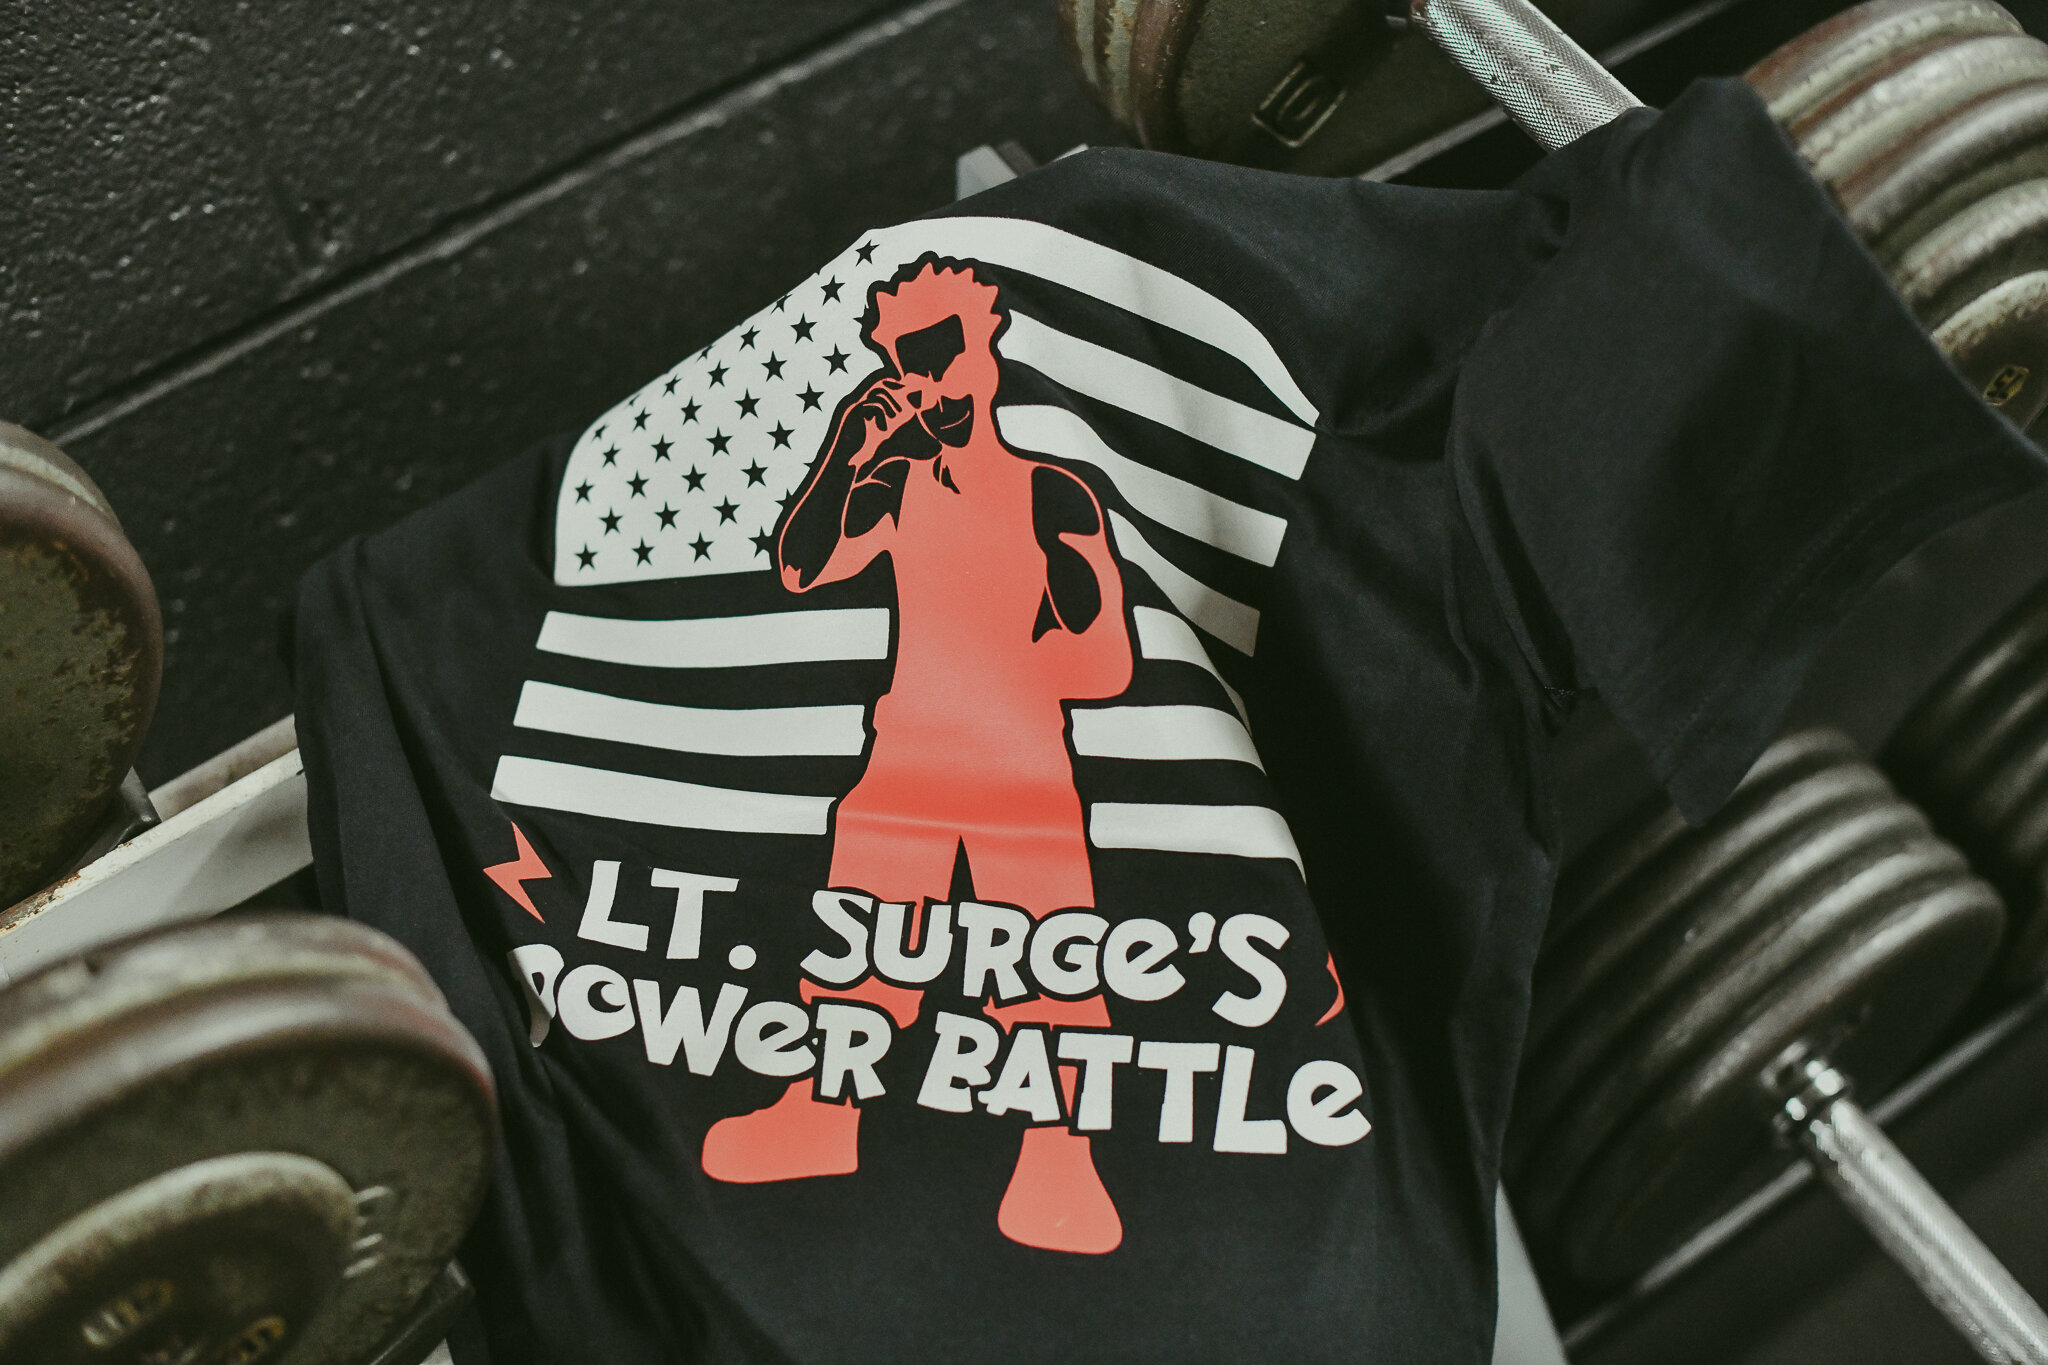   USPA LT. SURGE’S POWER BATTLE 2021 LOGO    © PHOTOGRAPHED BY ARIELLE GALLIONE    LT. SURGE IS A CHARACTER OWNED BY THE POKEMON COMPANY  